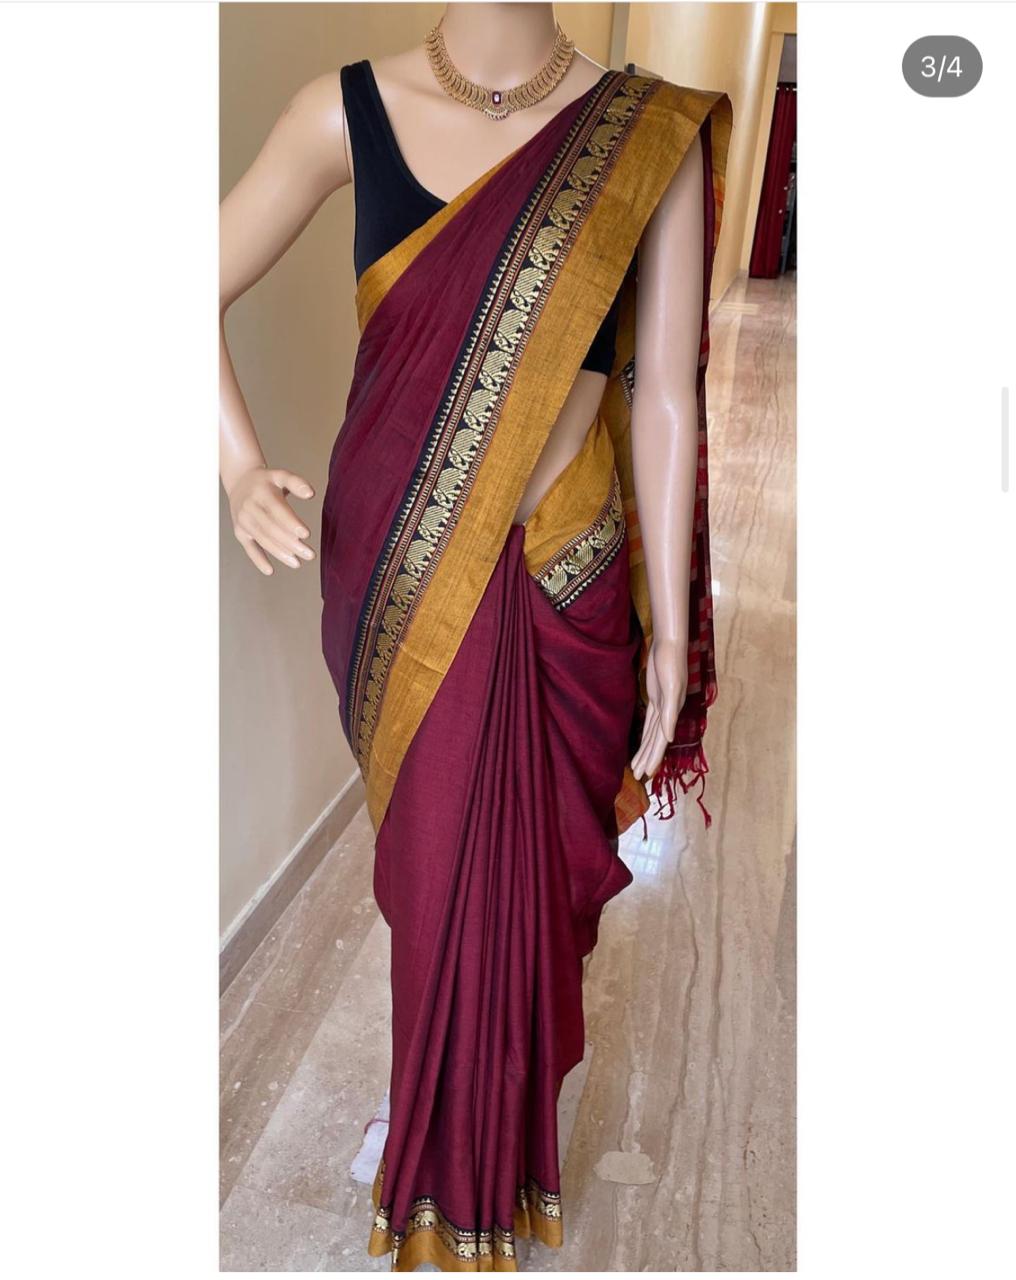 Crepe blend mysore silk saree in bottle green from the house of Ithal. Light  weight and elegantly simple #saree #sareelove #sarees #s... | Instagram